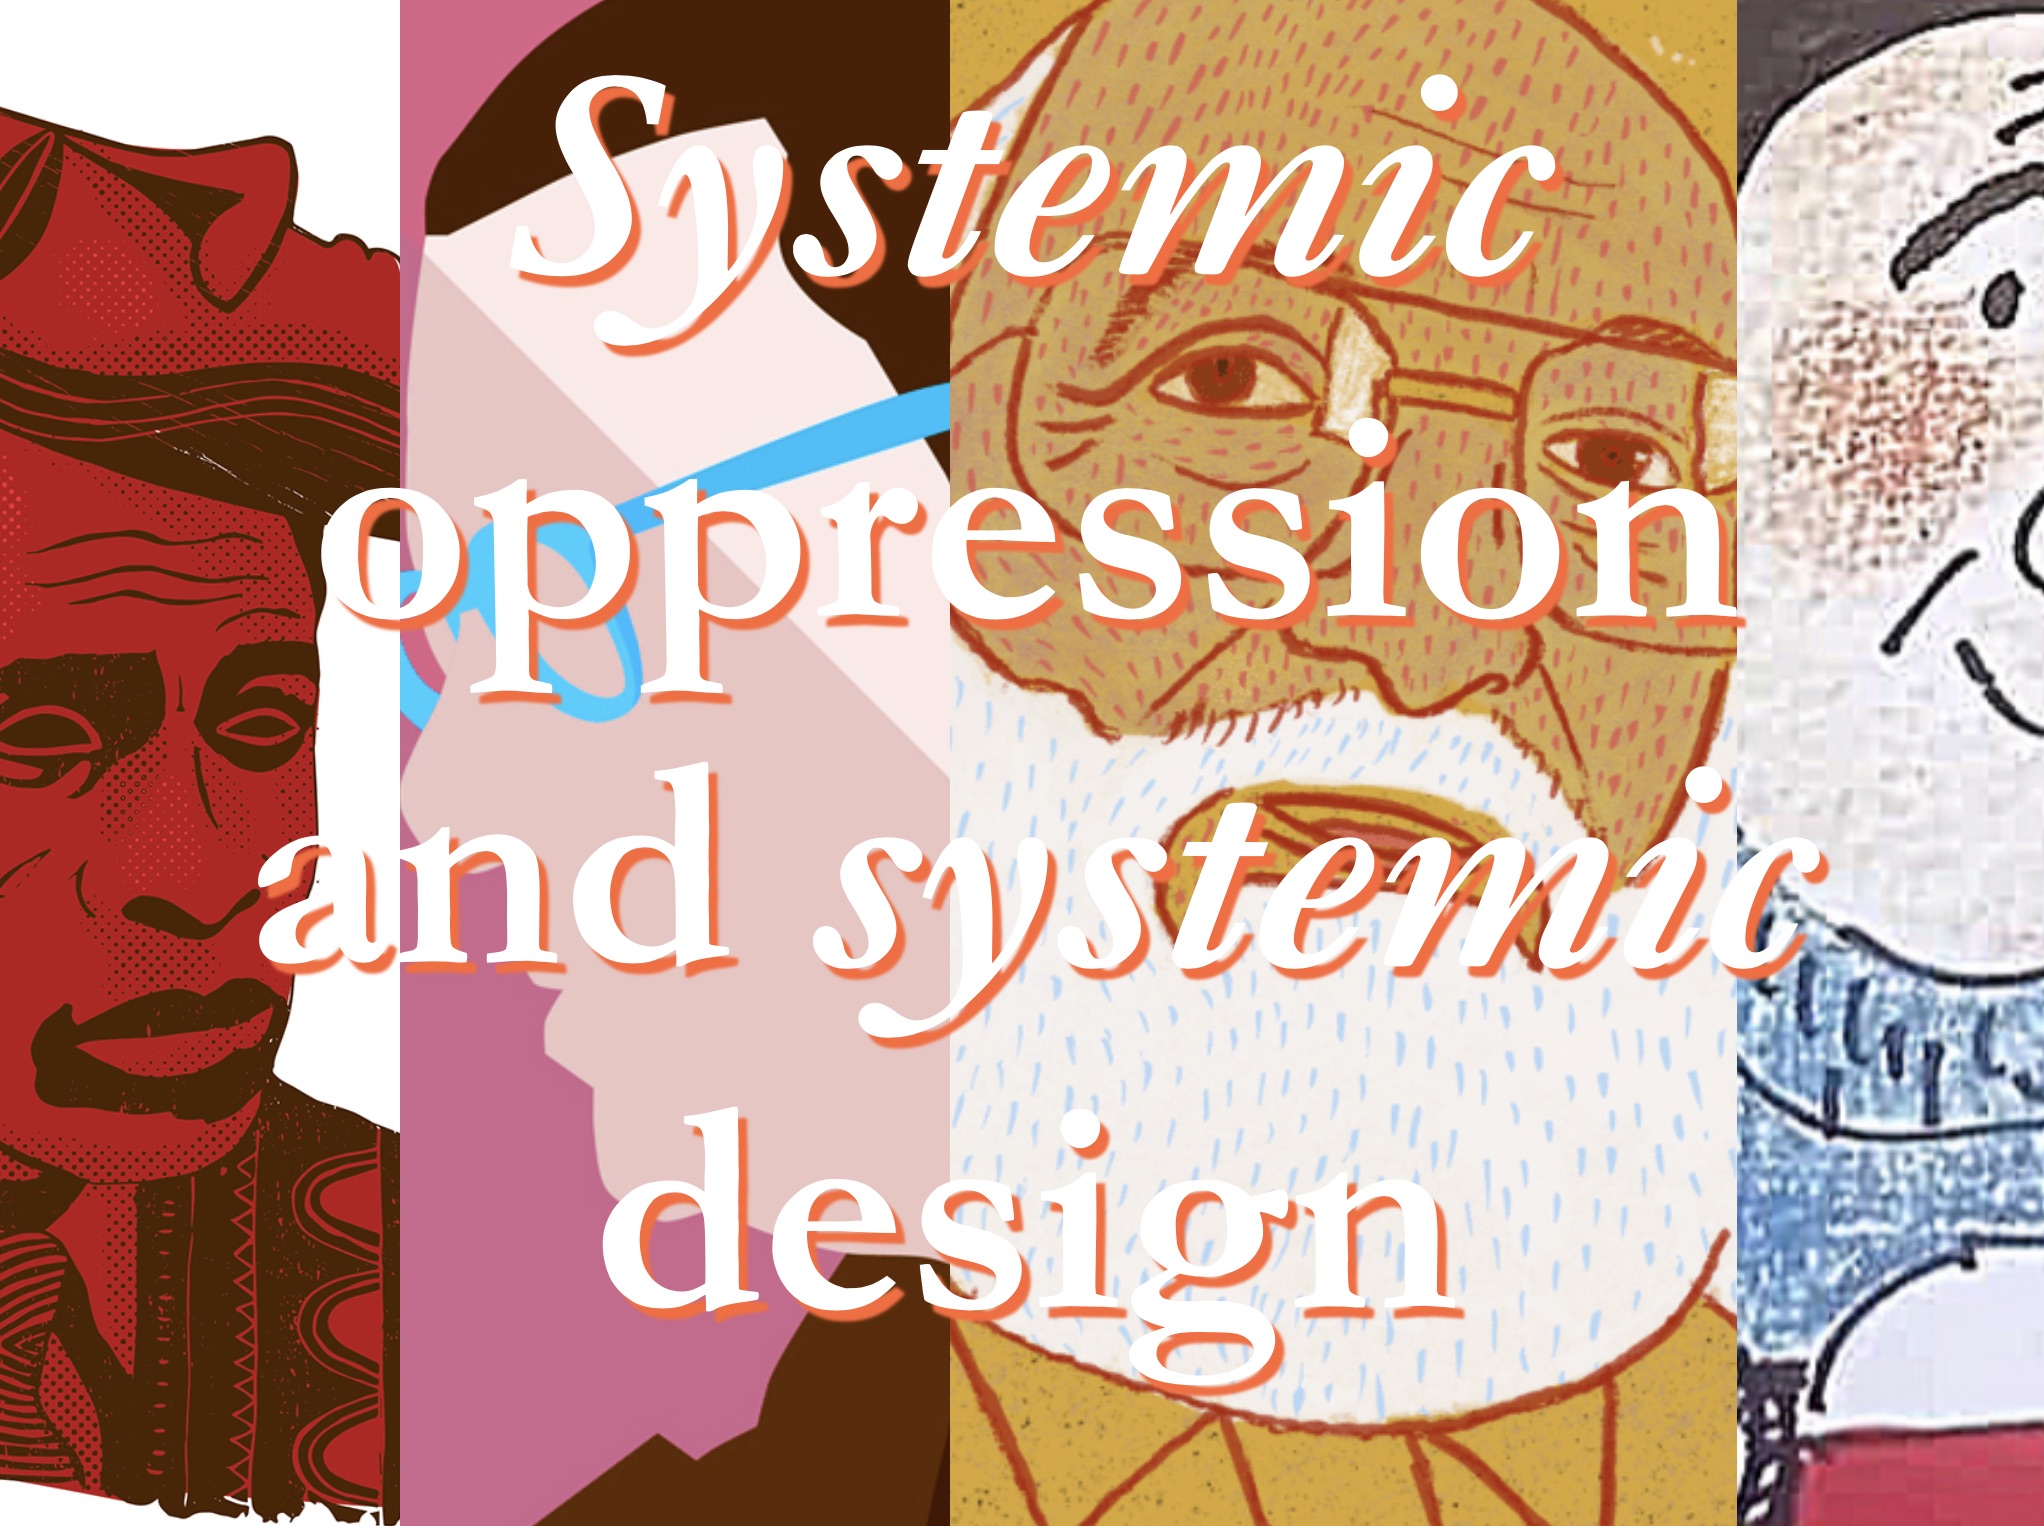 Systemic oppression and systemic design